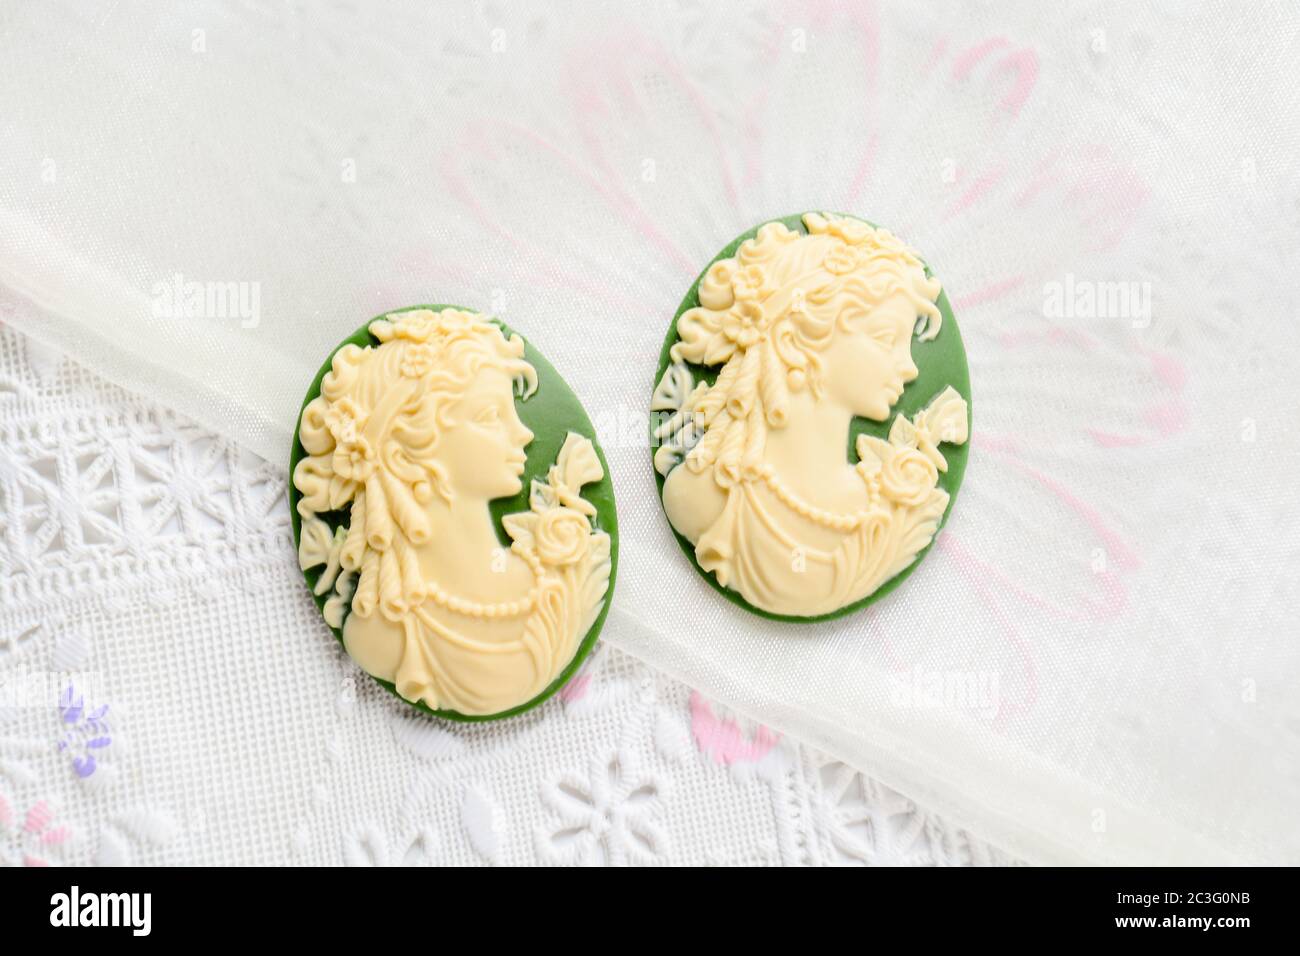 Antique cameo with ladies face, cameo brooch representing the side portrait of a woman Stock Photo